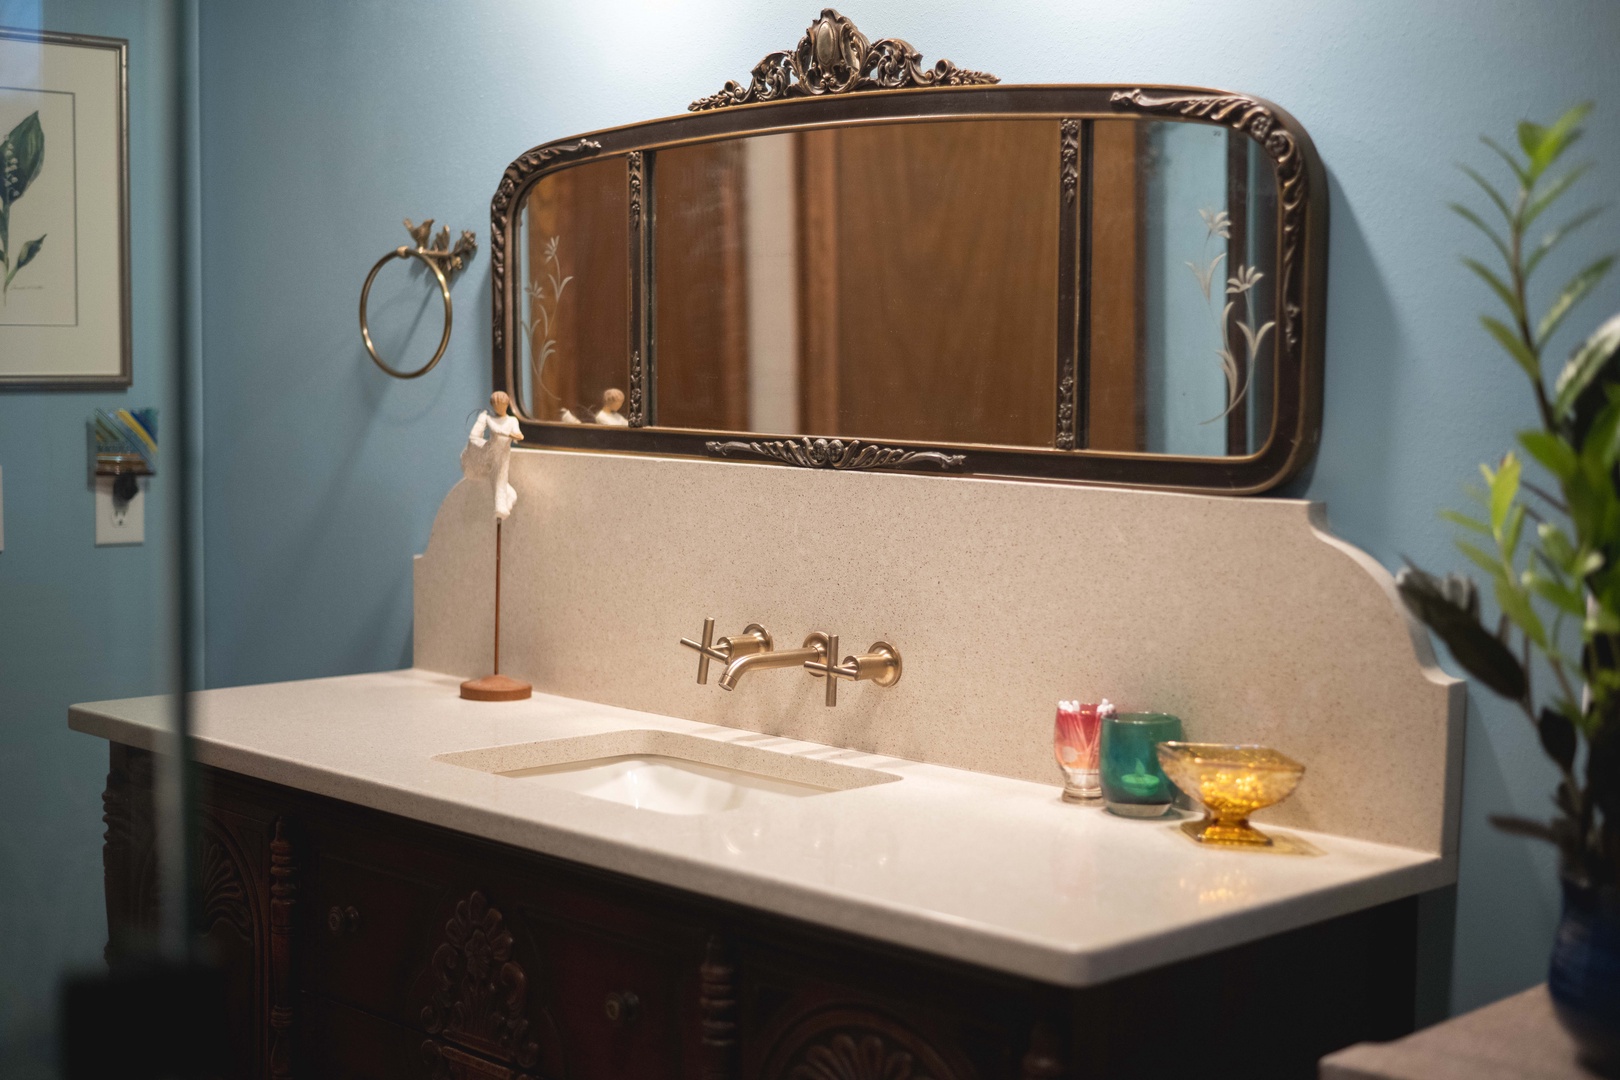 This 2nd floor full bathroom offers a gorgeous vanity & glass shower